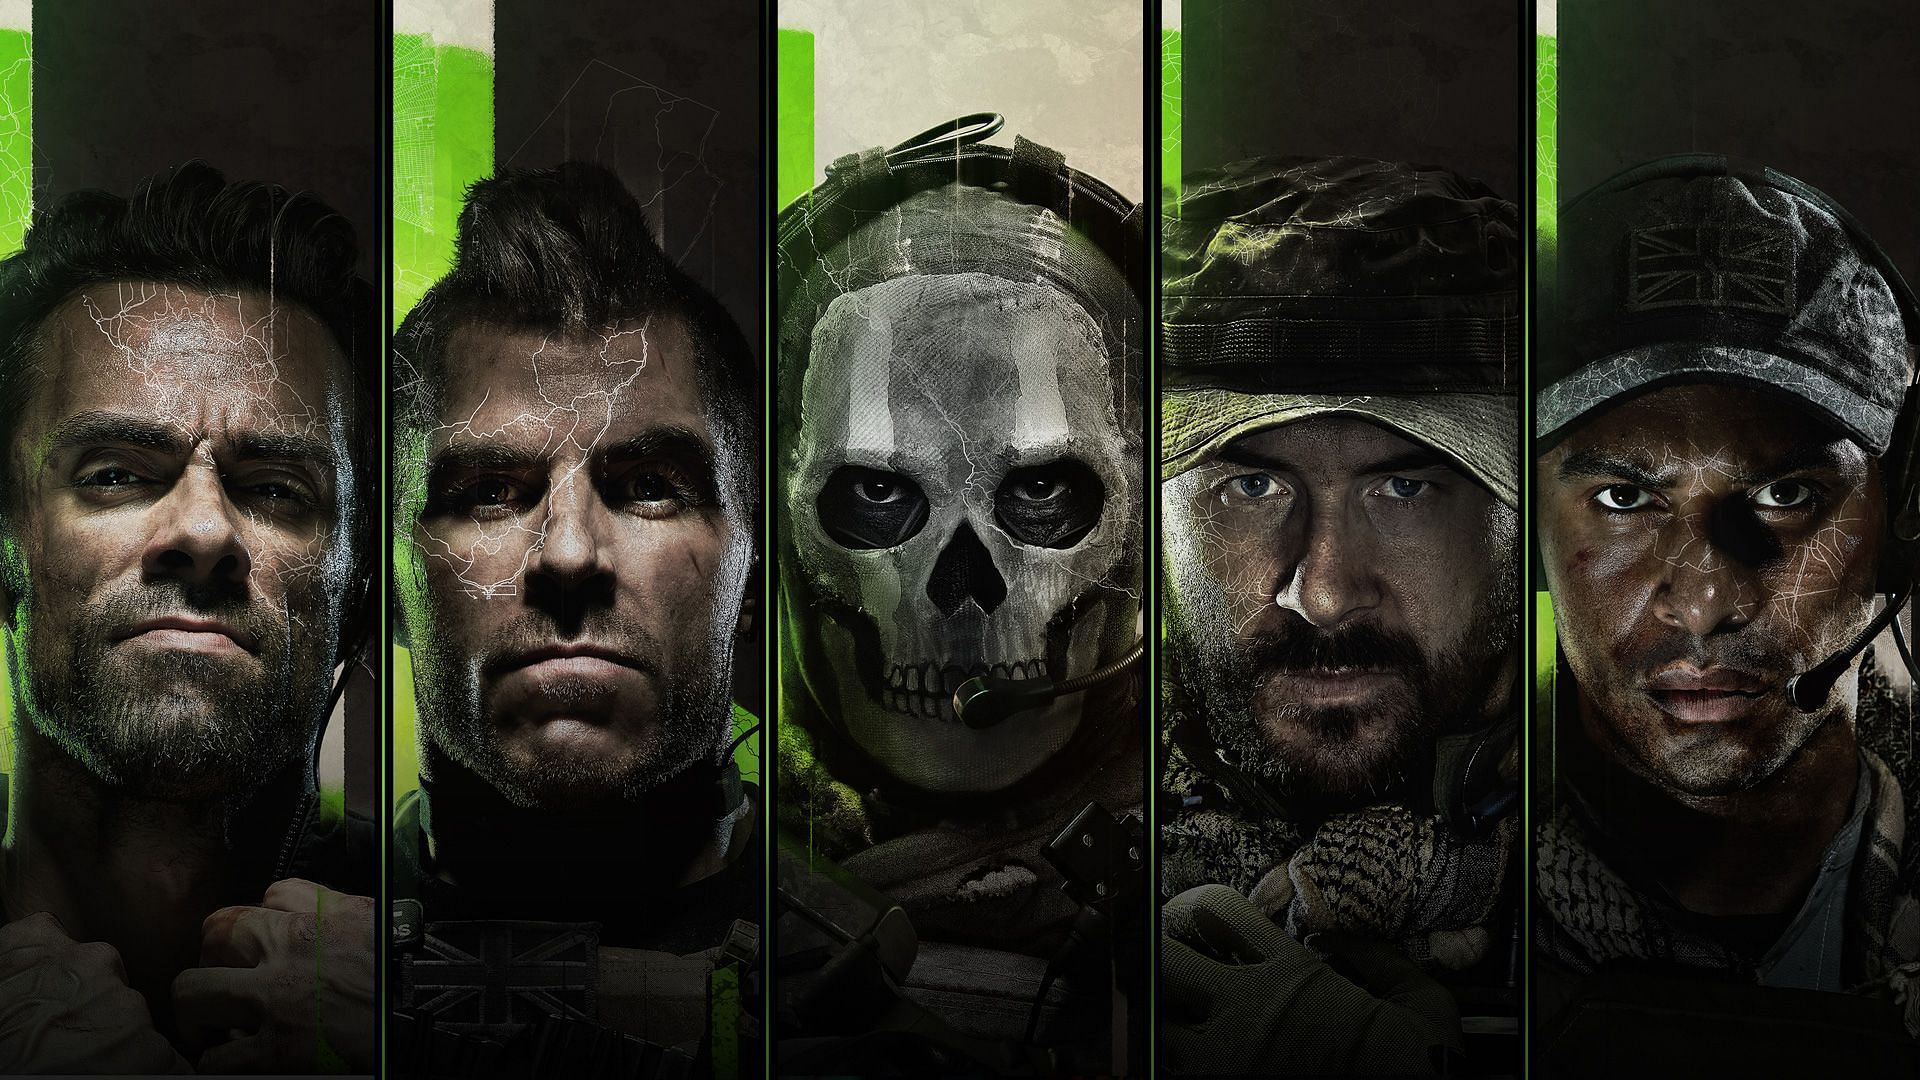 Call of Duty: Modern Warfare 2 Remastered art uncovered in update files